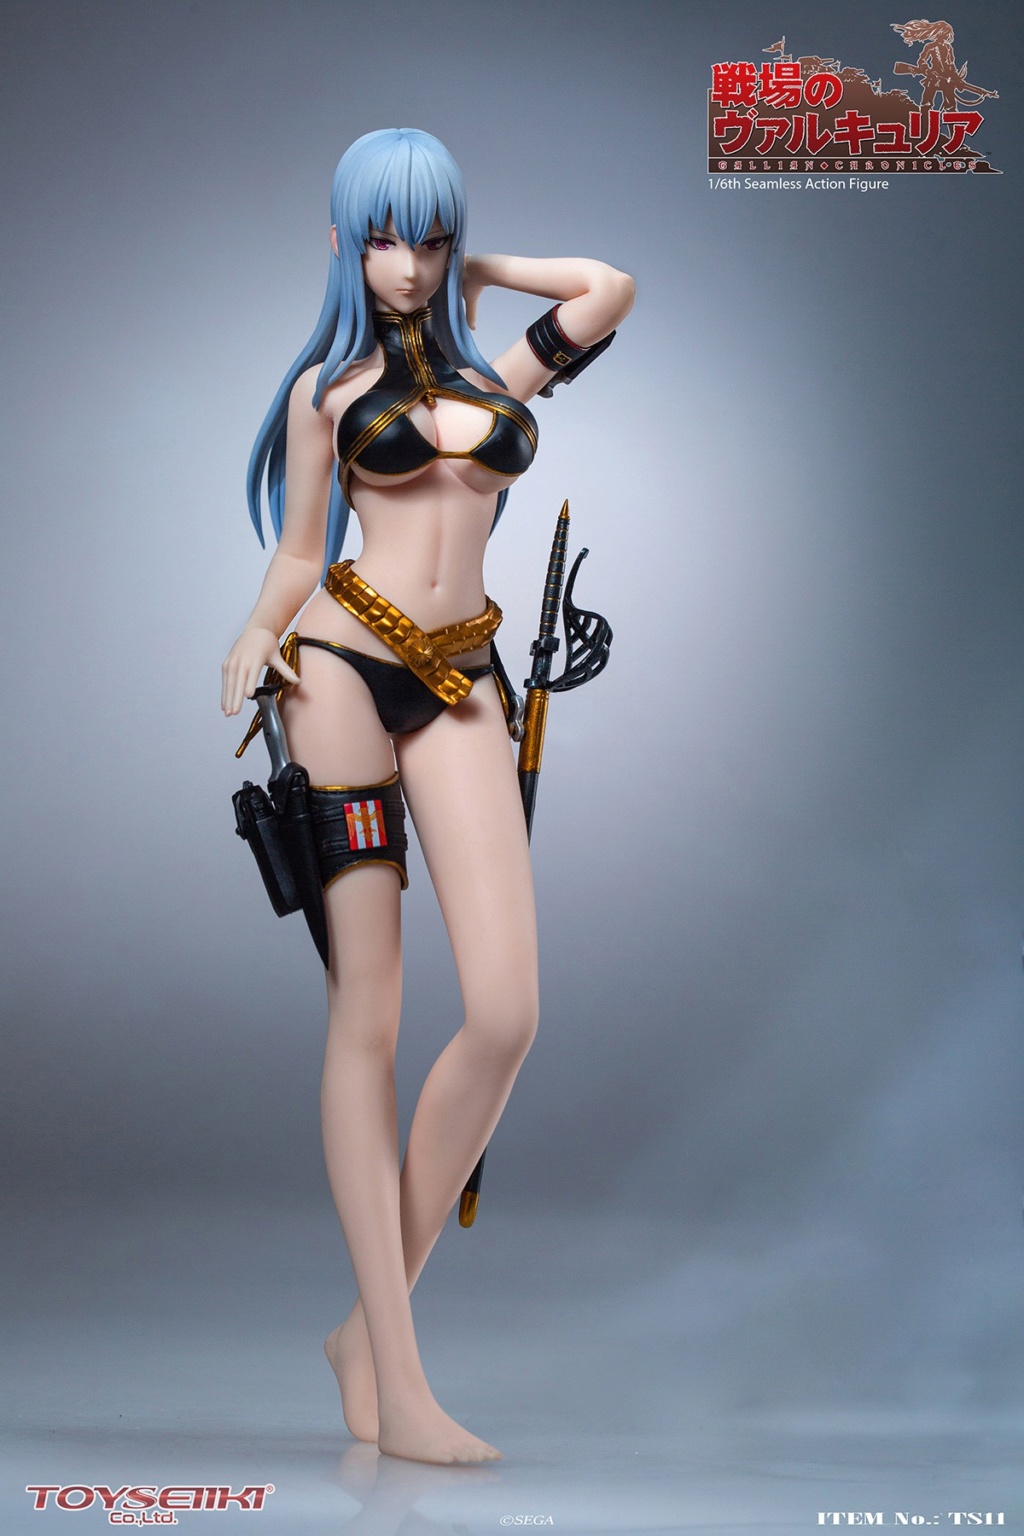 Stylized - NEW PRODUCT: TOYSEIIKI: 1/6 "The Valkyrie of the Battlefield"- Selvaria Bles Action Figure (# TS11) 12000410